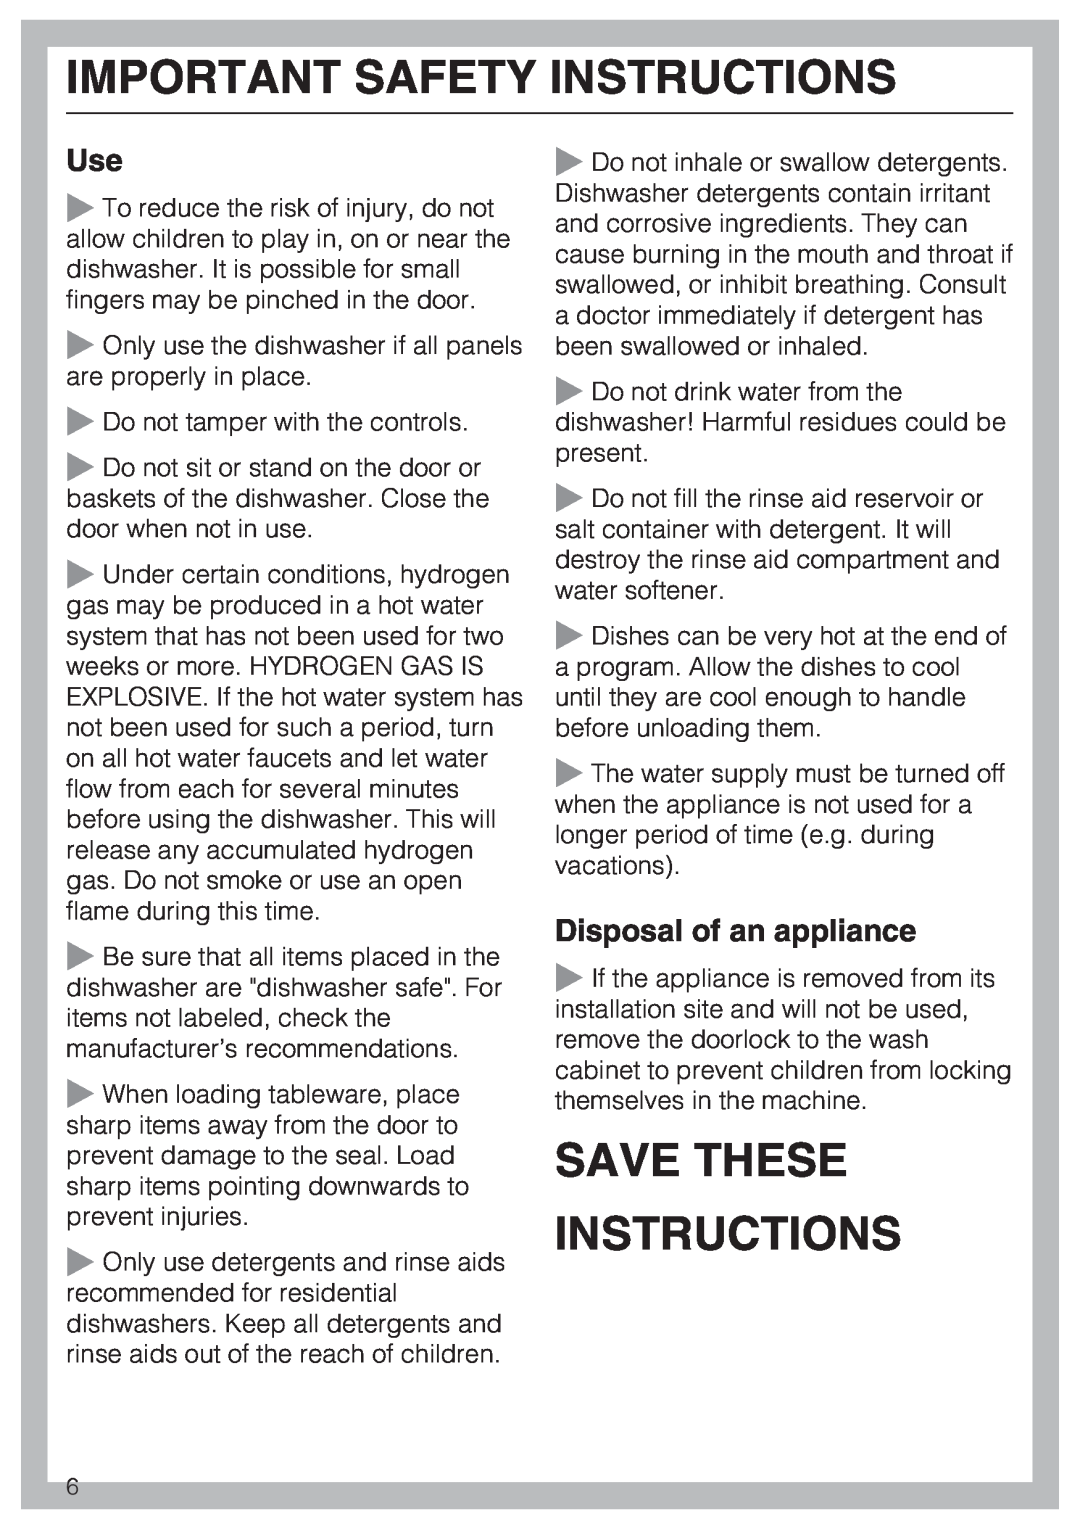 Miele G 4225, G 4220 manual Save These Instructions, Disposal of an appliance, Important Safety Instructions 